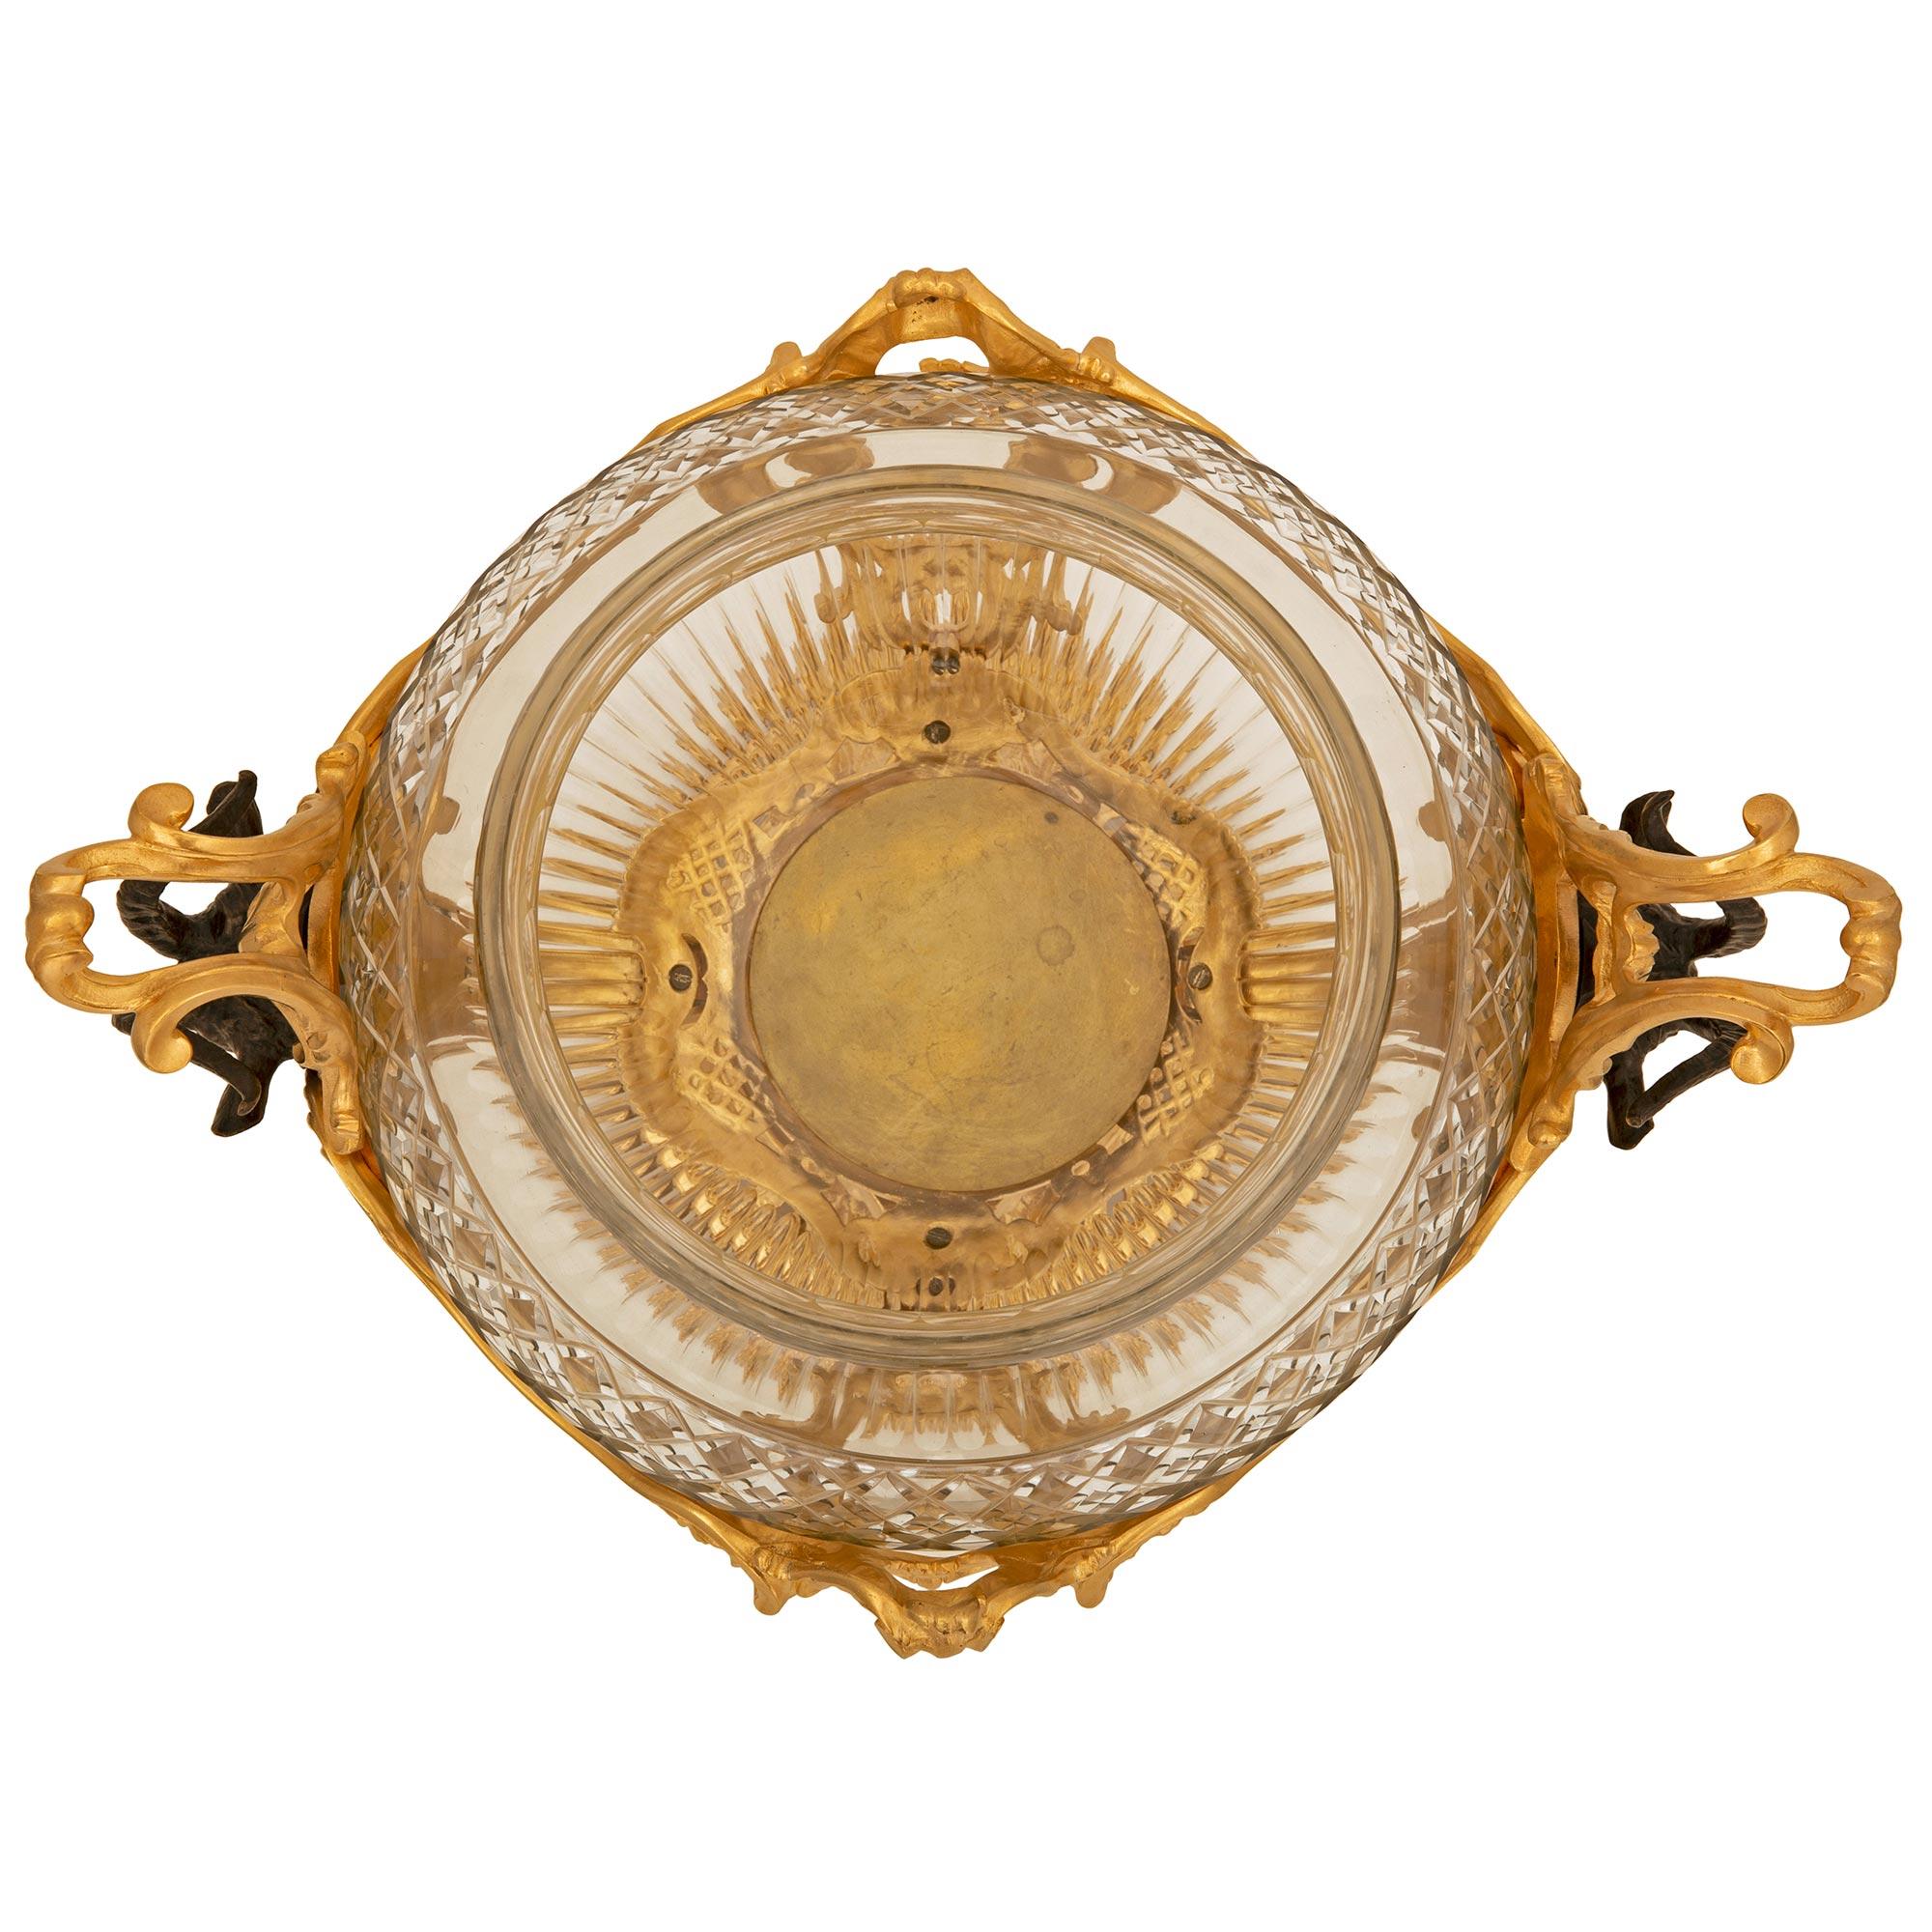 A striking and very unique French 19th century Louis XV st. ormolu, patinated bronze, and Baccarat crystal centerpiece. The centerpiece is raised by a stunning pierced base with superb scrolled foliate designs and a handsome finely detailed central